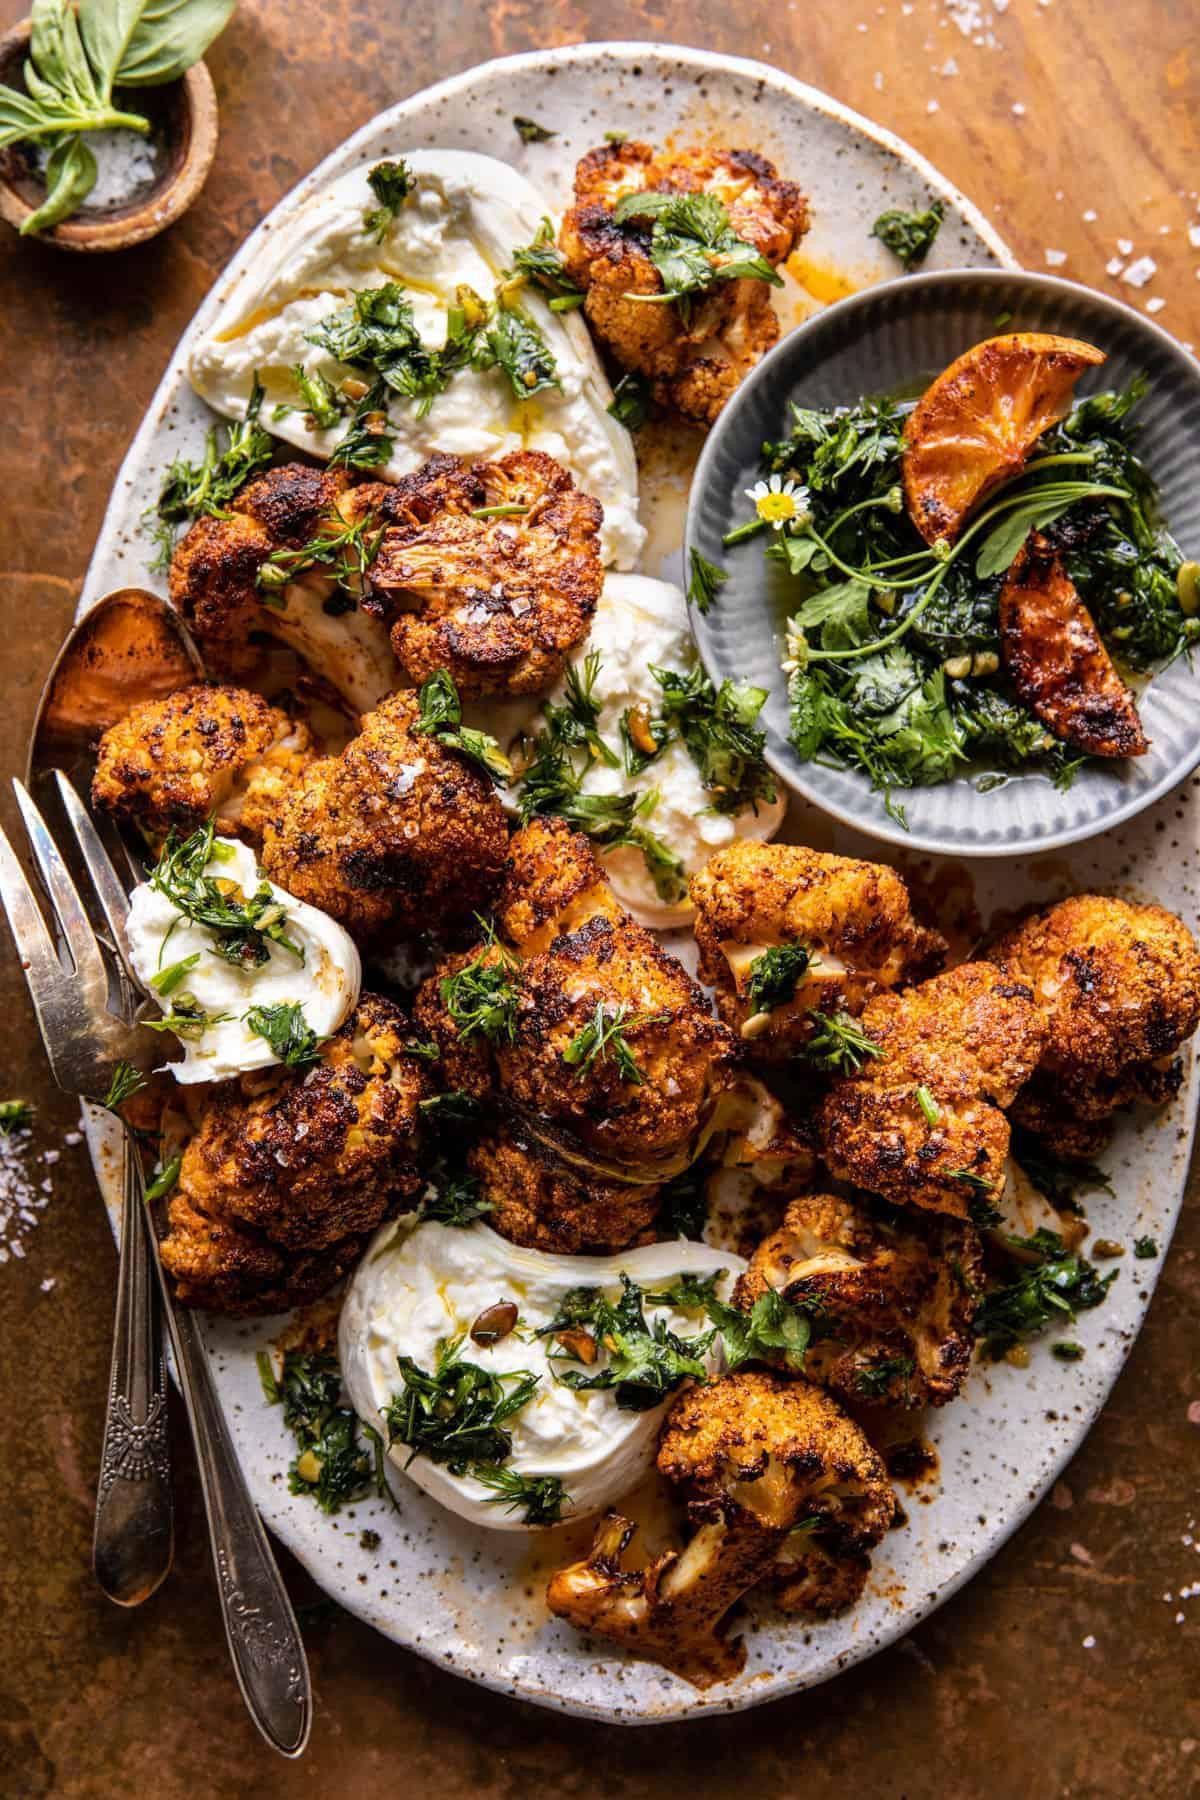 Cauliflower with Burrata and Herbs from Half Baked Harvest